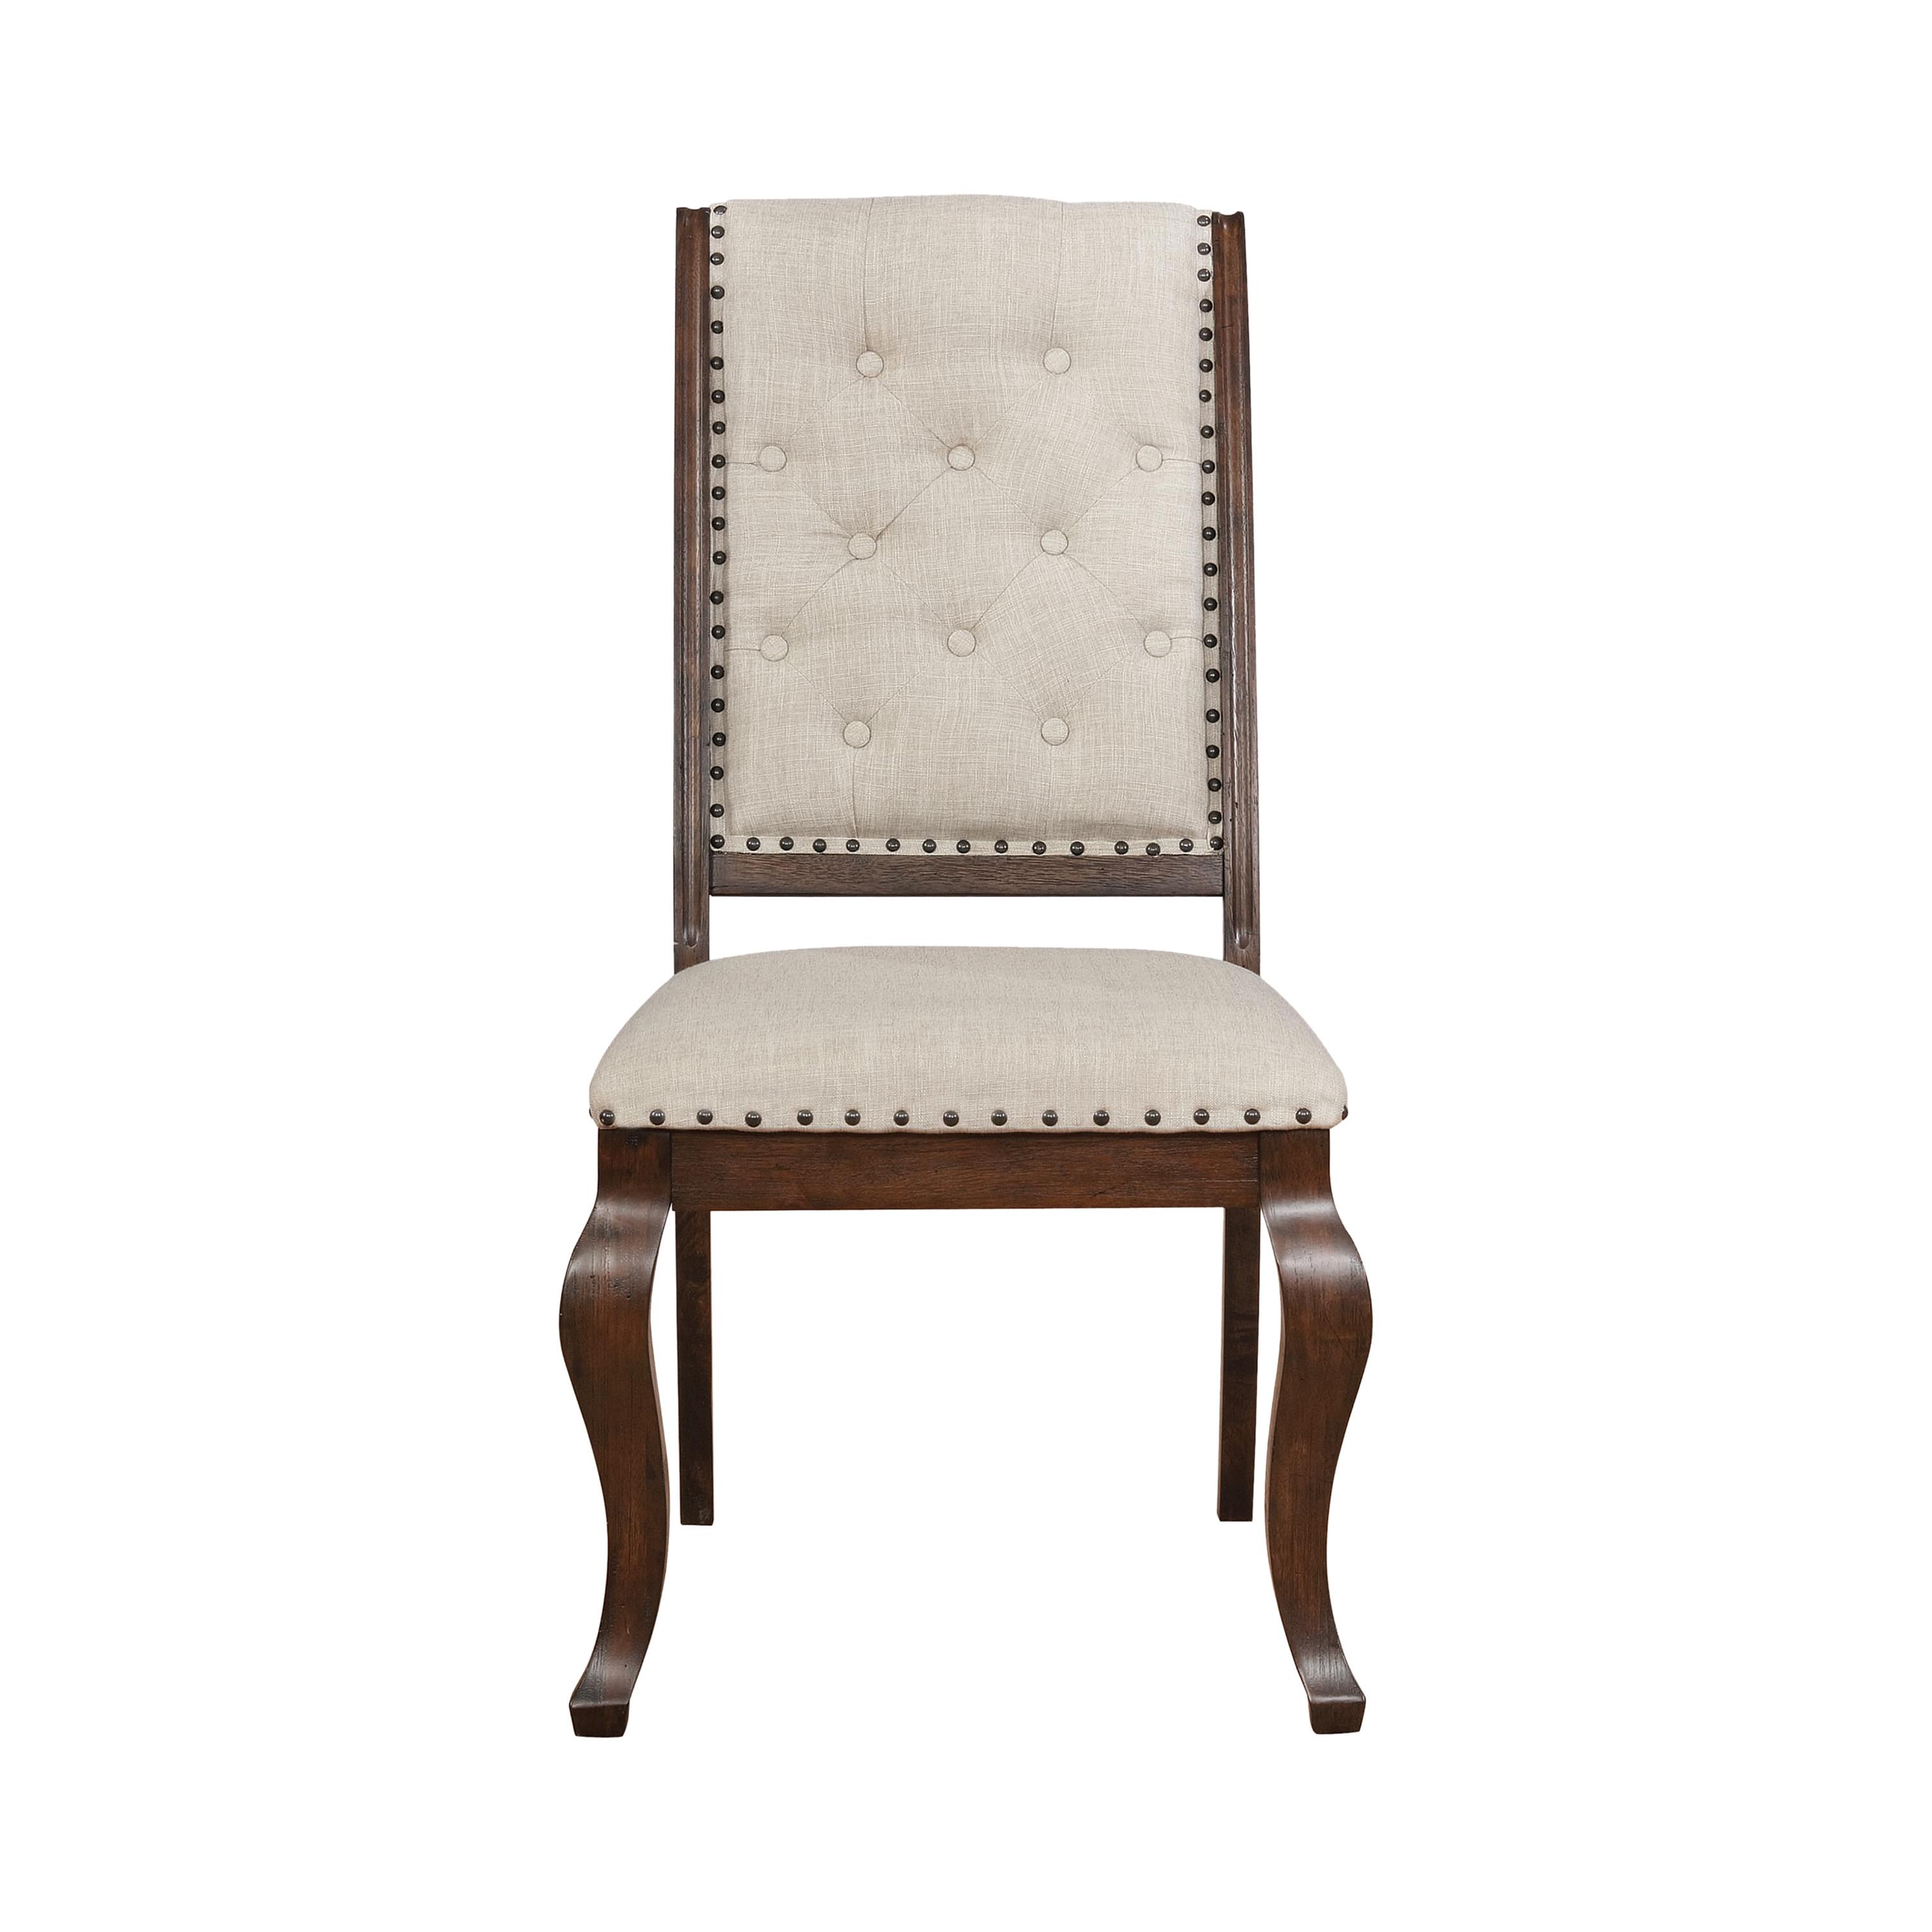 Transitional Side Chair Set 110312 Brockway 110312 in Java Fabric